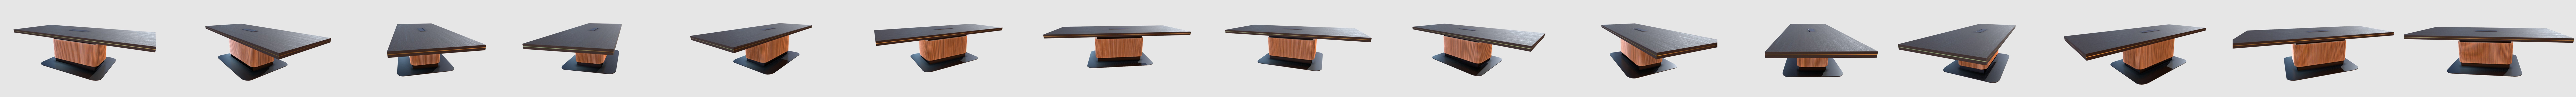 conference table 3d model